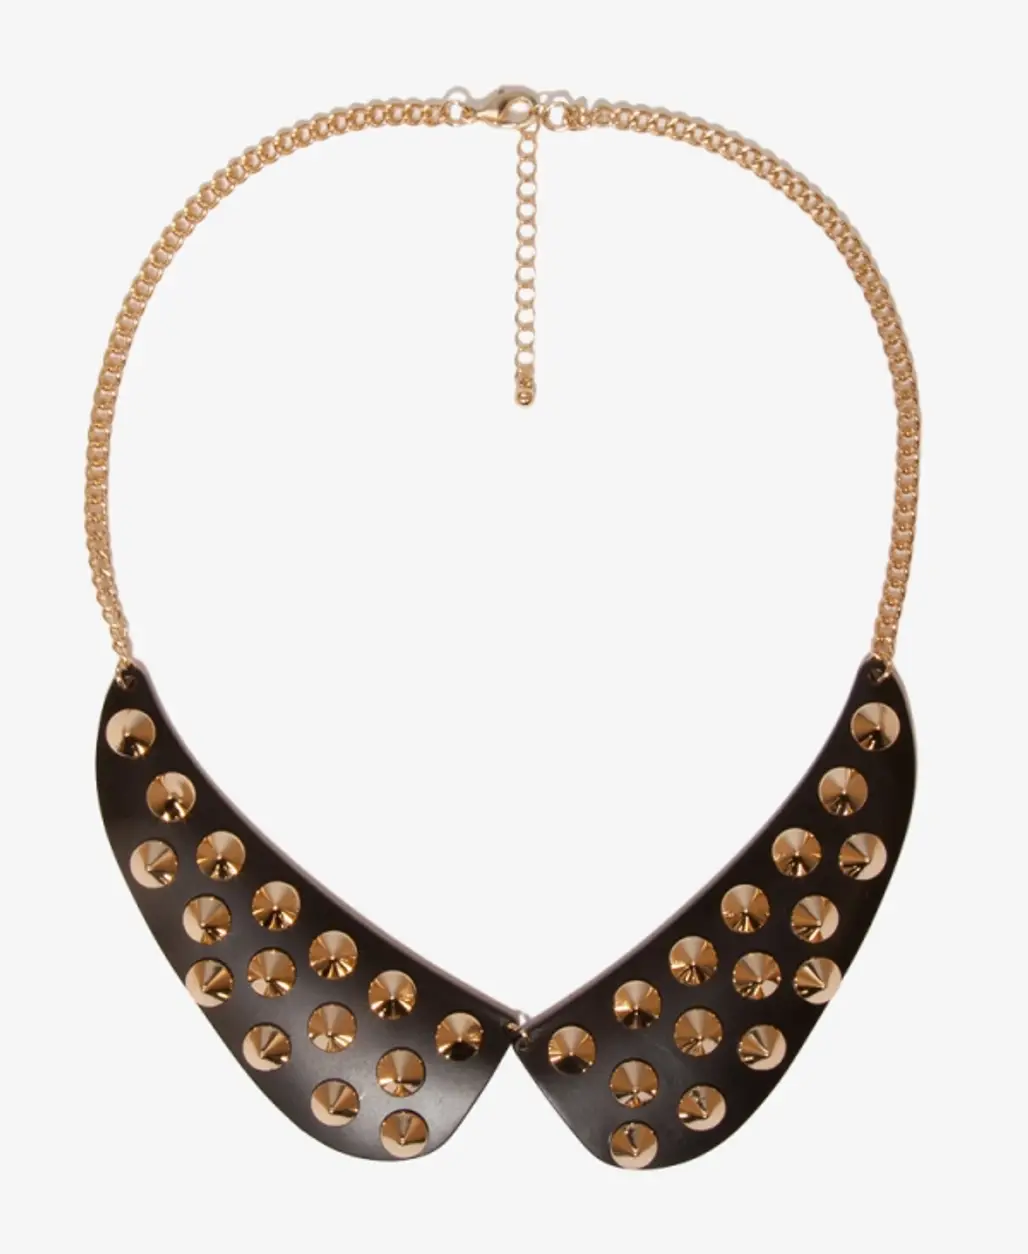 Forever 21 – Peter Pan Spiked Bib Collar Necklace